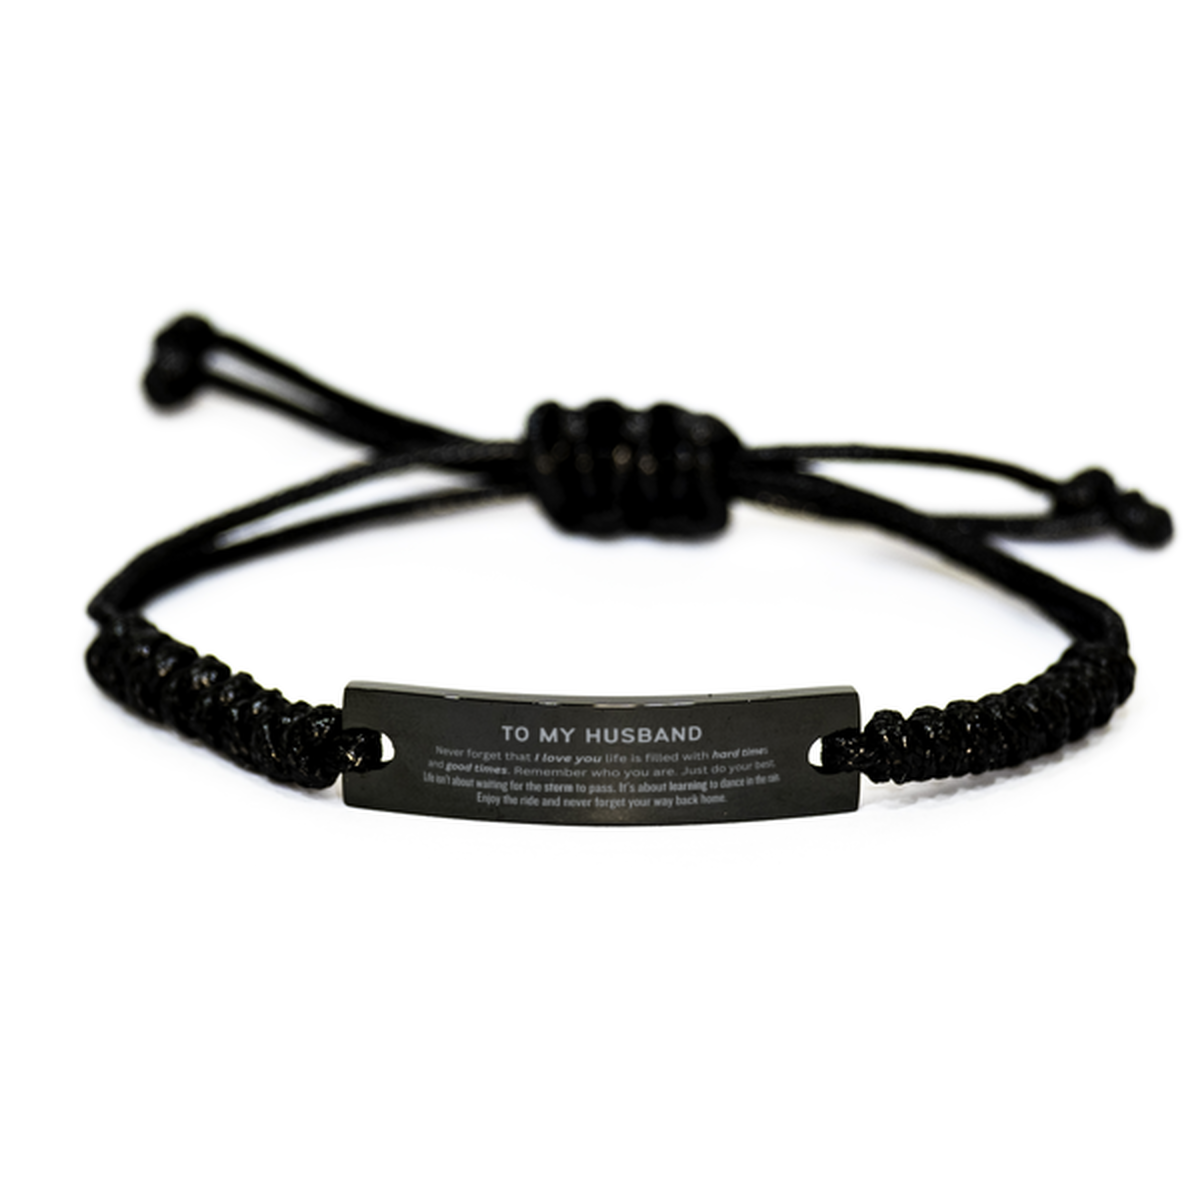 Christmas Husband Black Rope Bracelet Gifts, To My Husband Birthday Thank You Gifts For Husband, Graduation Unique Gifts For Husband To My Husband Never forget that I love you life is filled with hard times and good times. Remember who you are. Just do yo